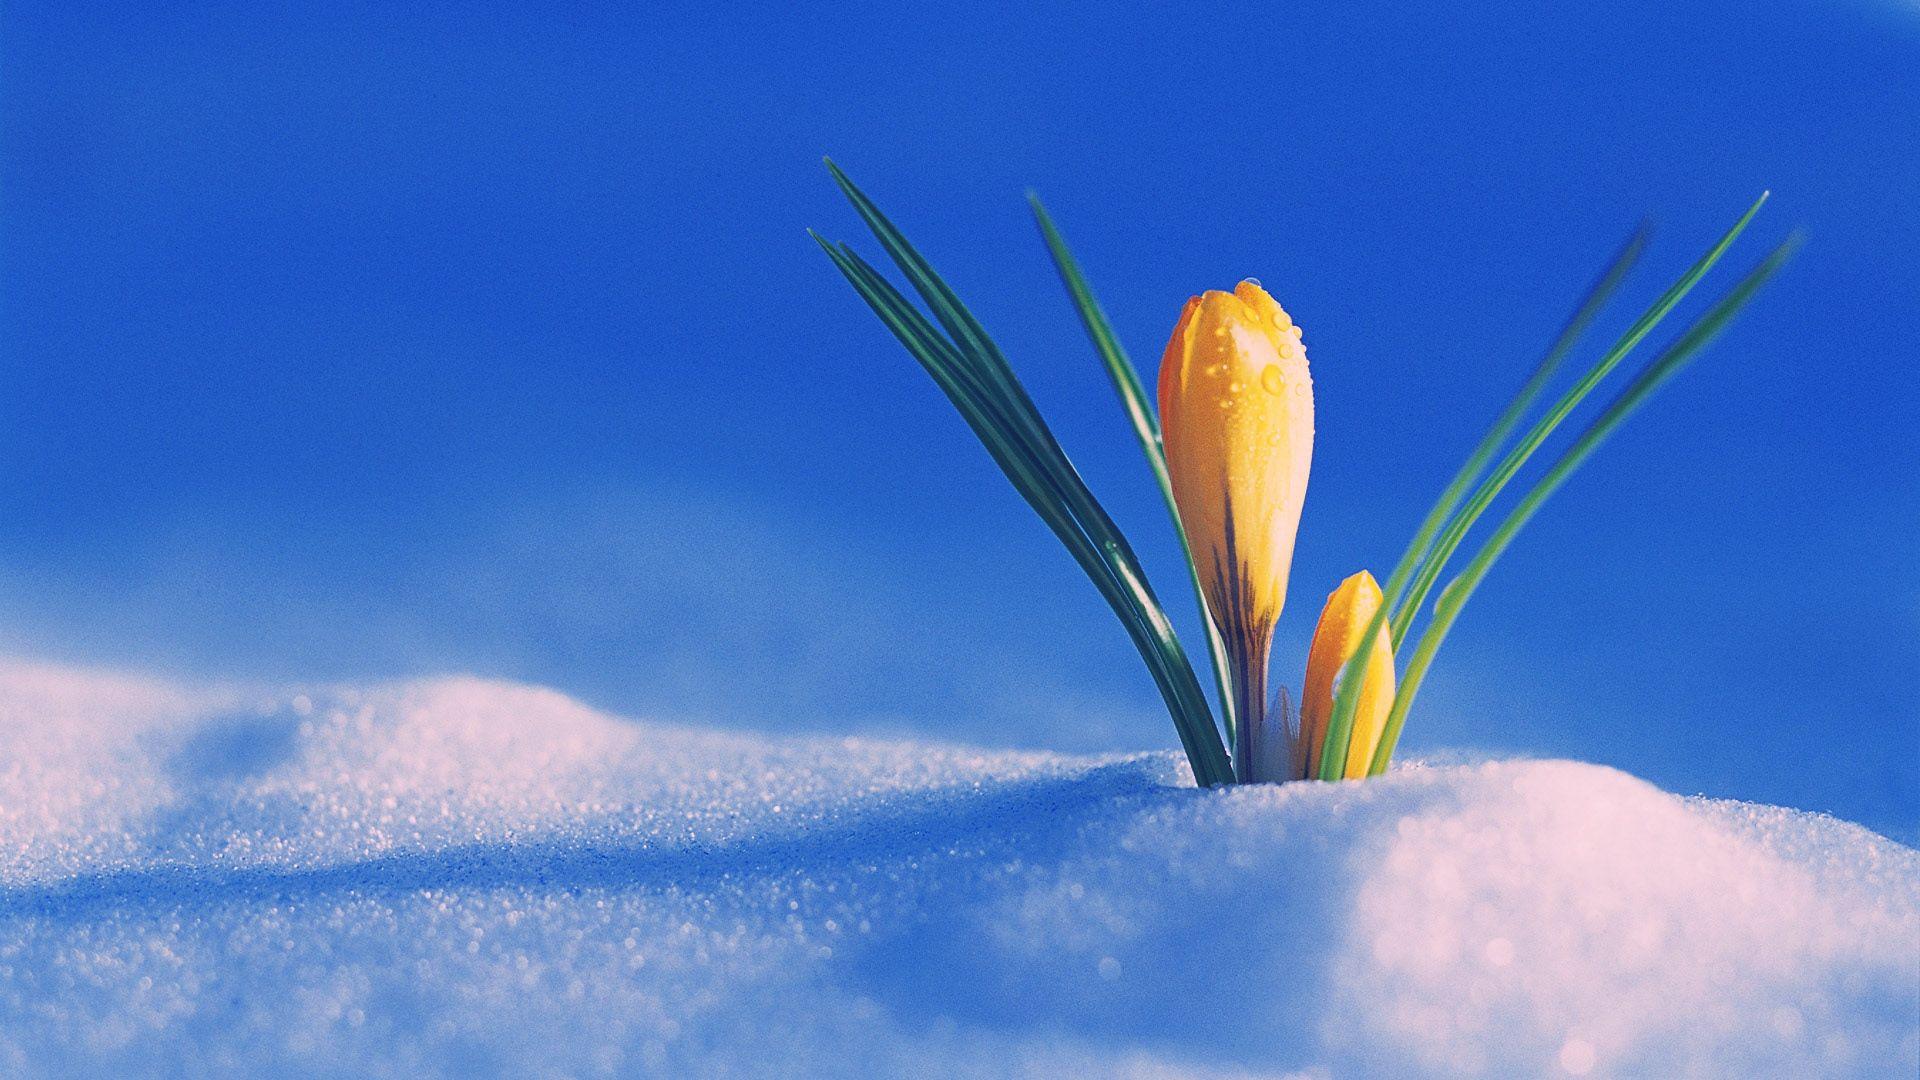 The First Day Of Spring Wallpaper For 1920x1080 Hdtv 1080p 607 15